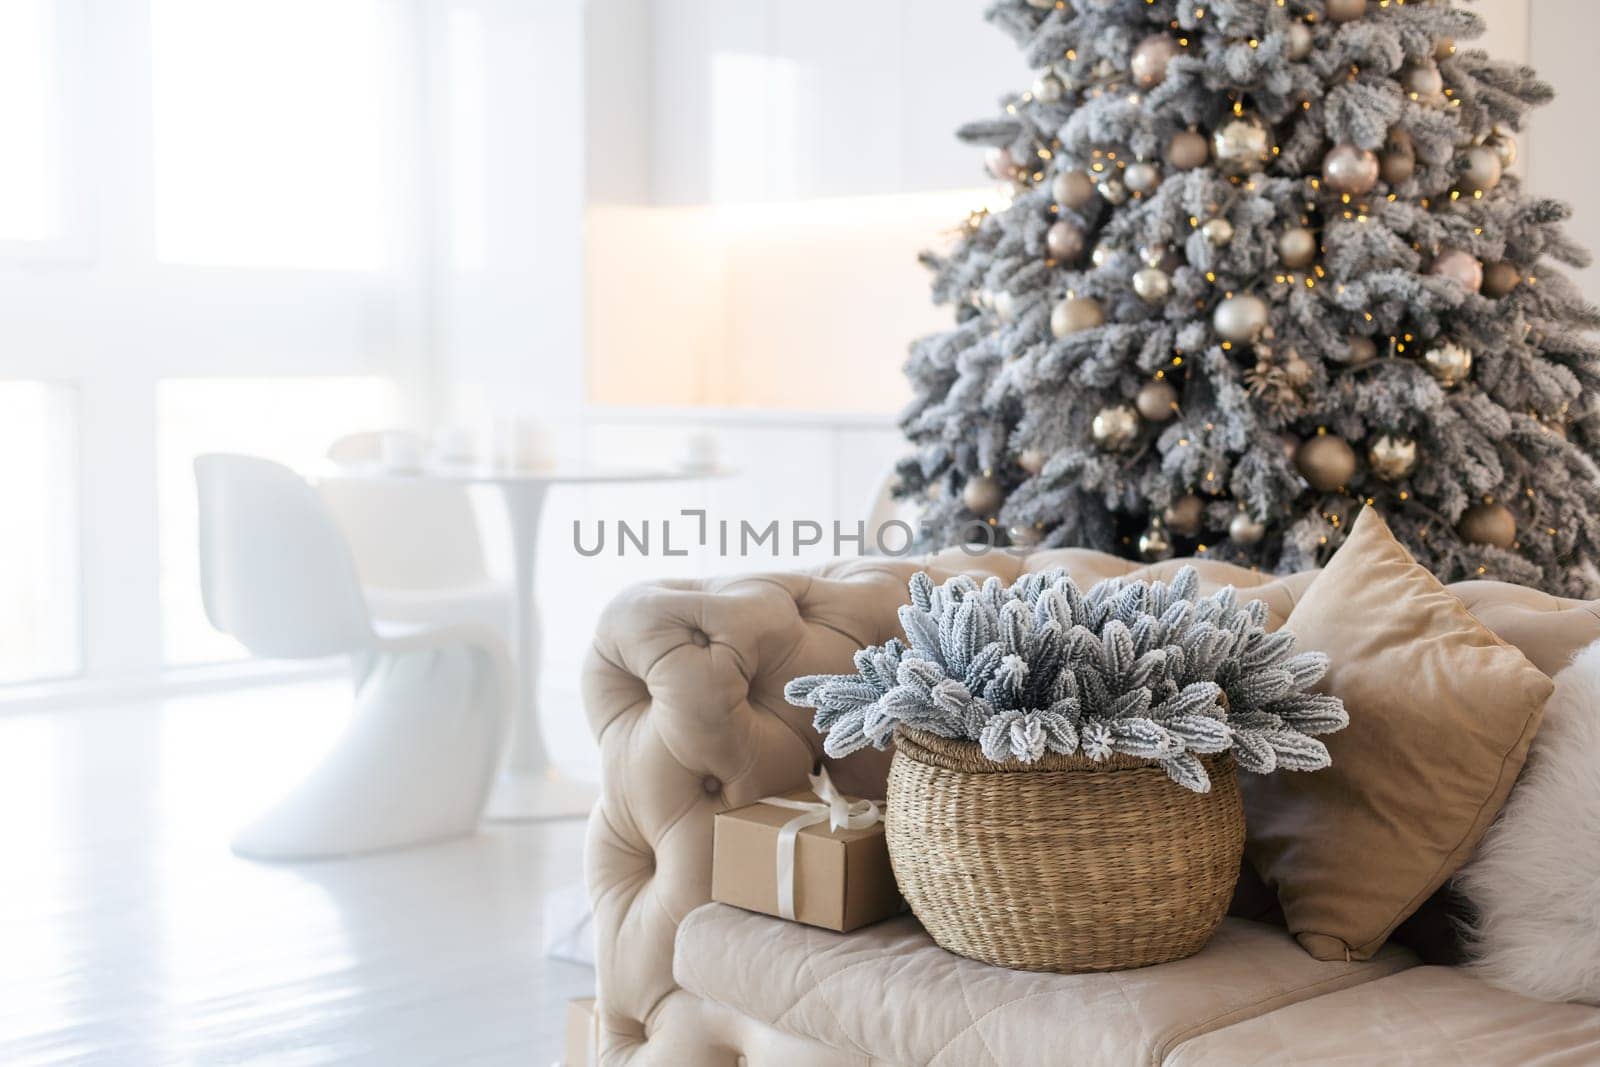 Classic white christmas interior with new year tree decorated. grey chair and presents under the tree.